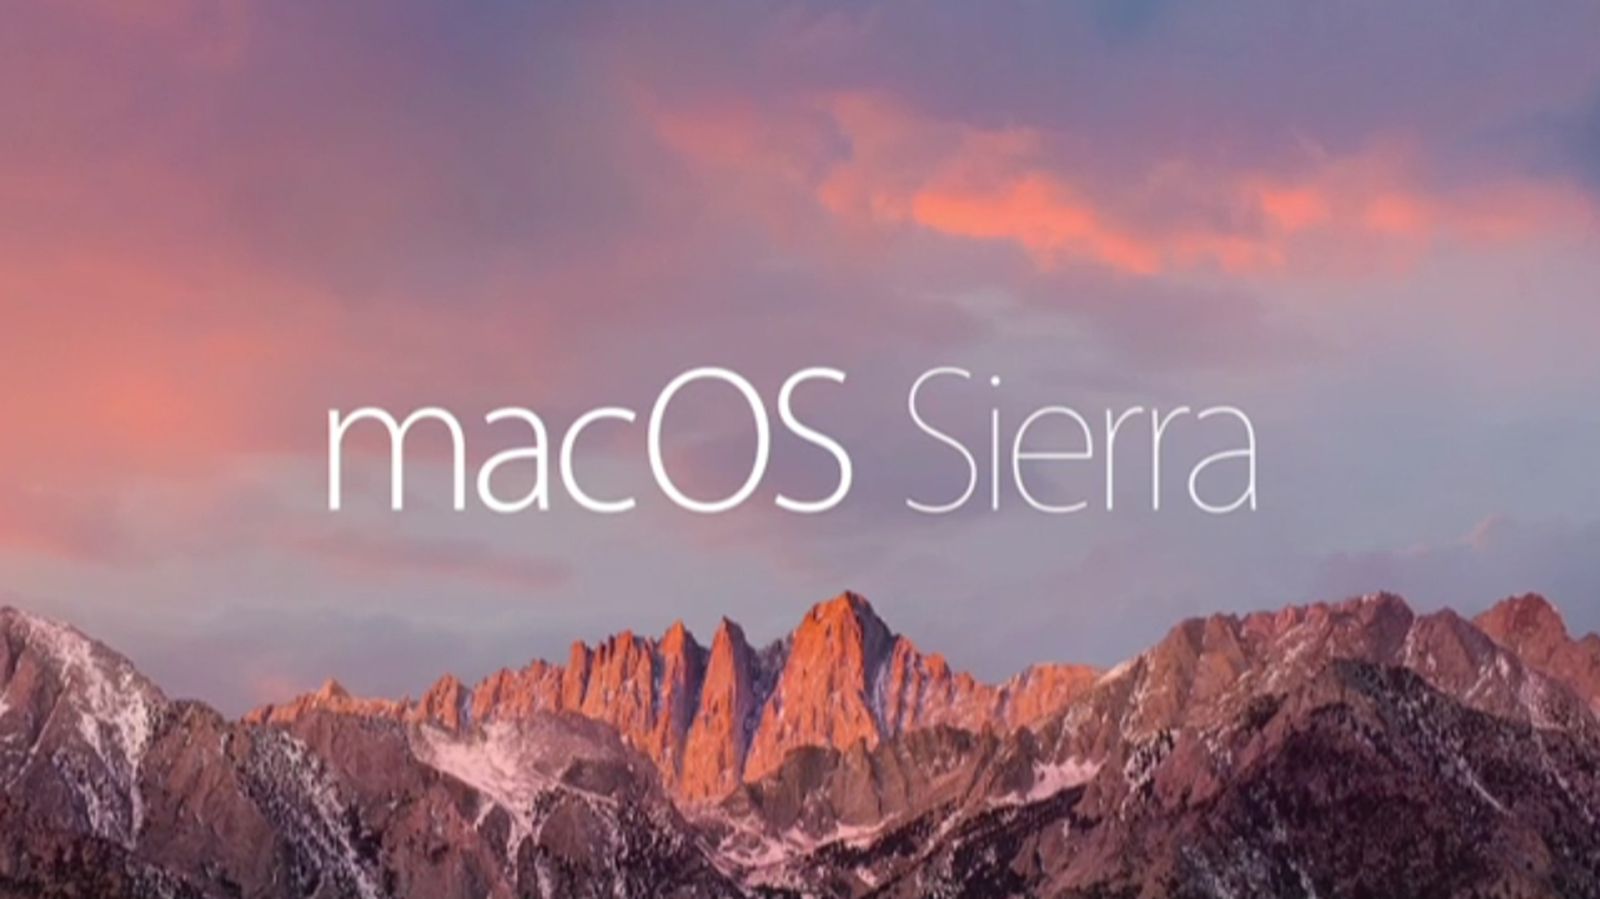 How Perform a Clean Installation of macOS Sierra -